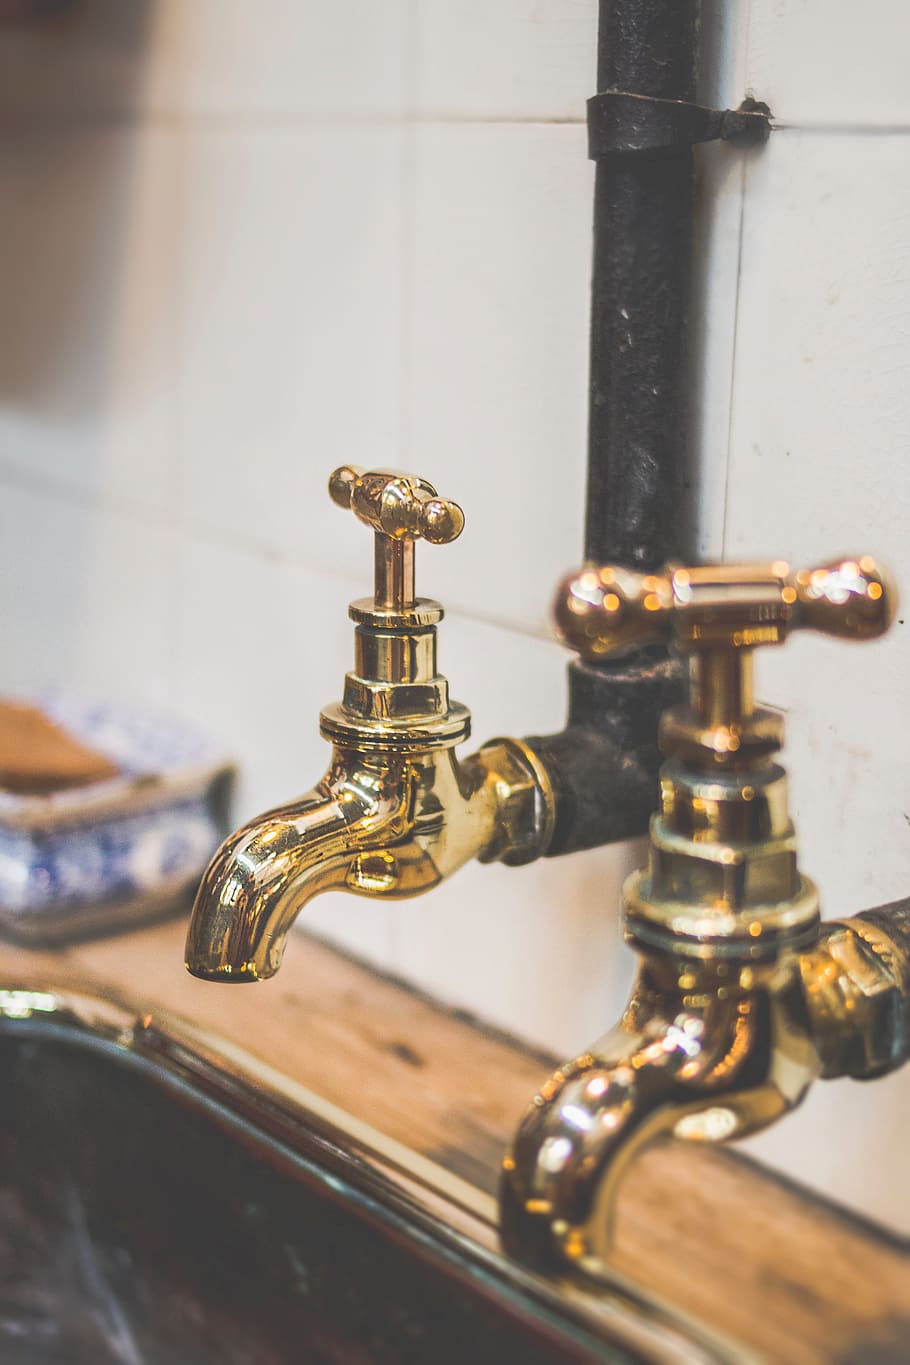 taps, gold, vintage, classic, brass, water, plumbing, pipes, sink, kitchen